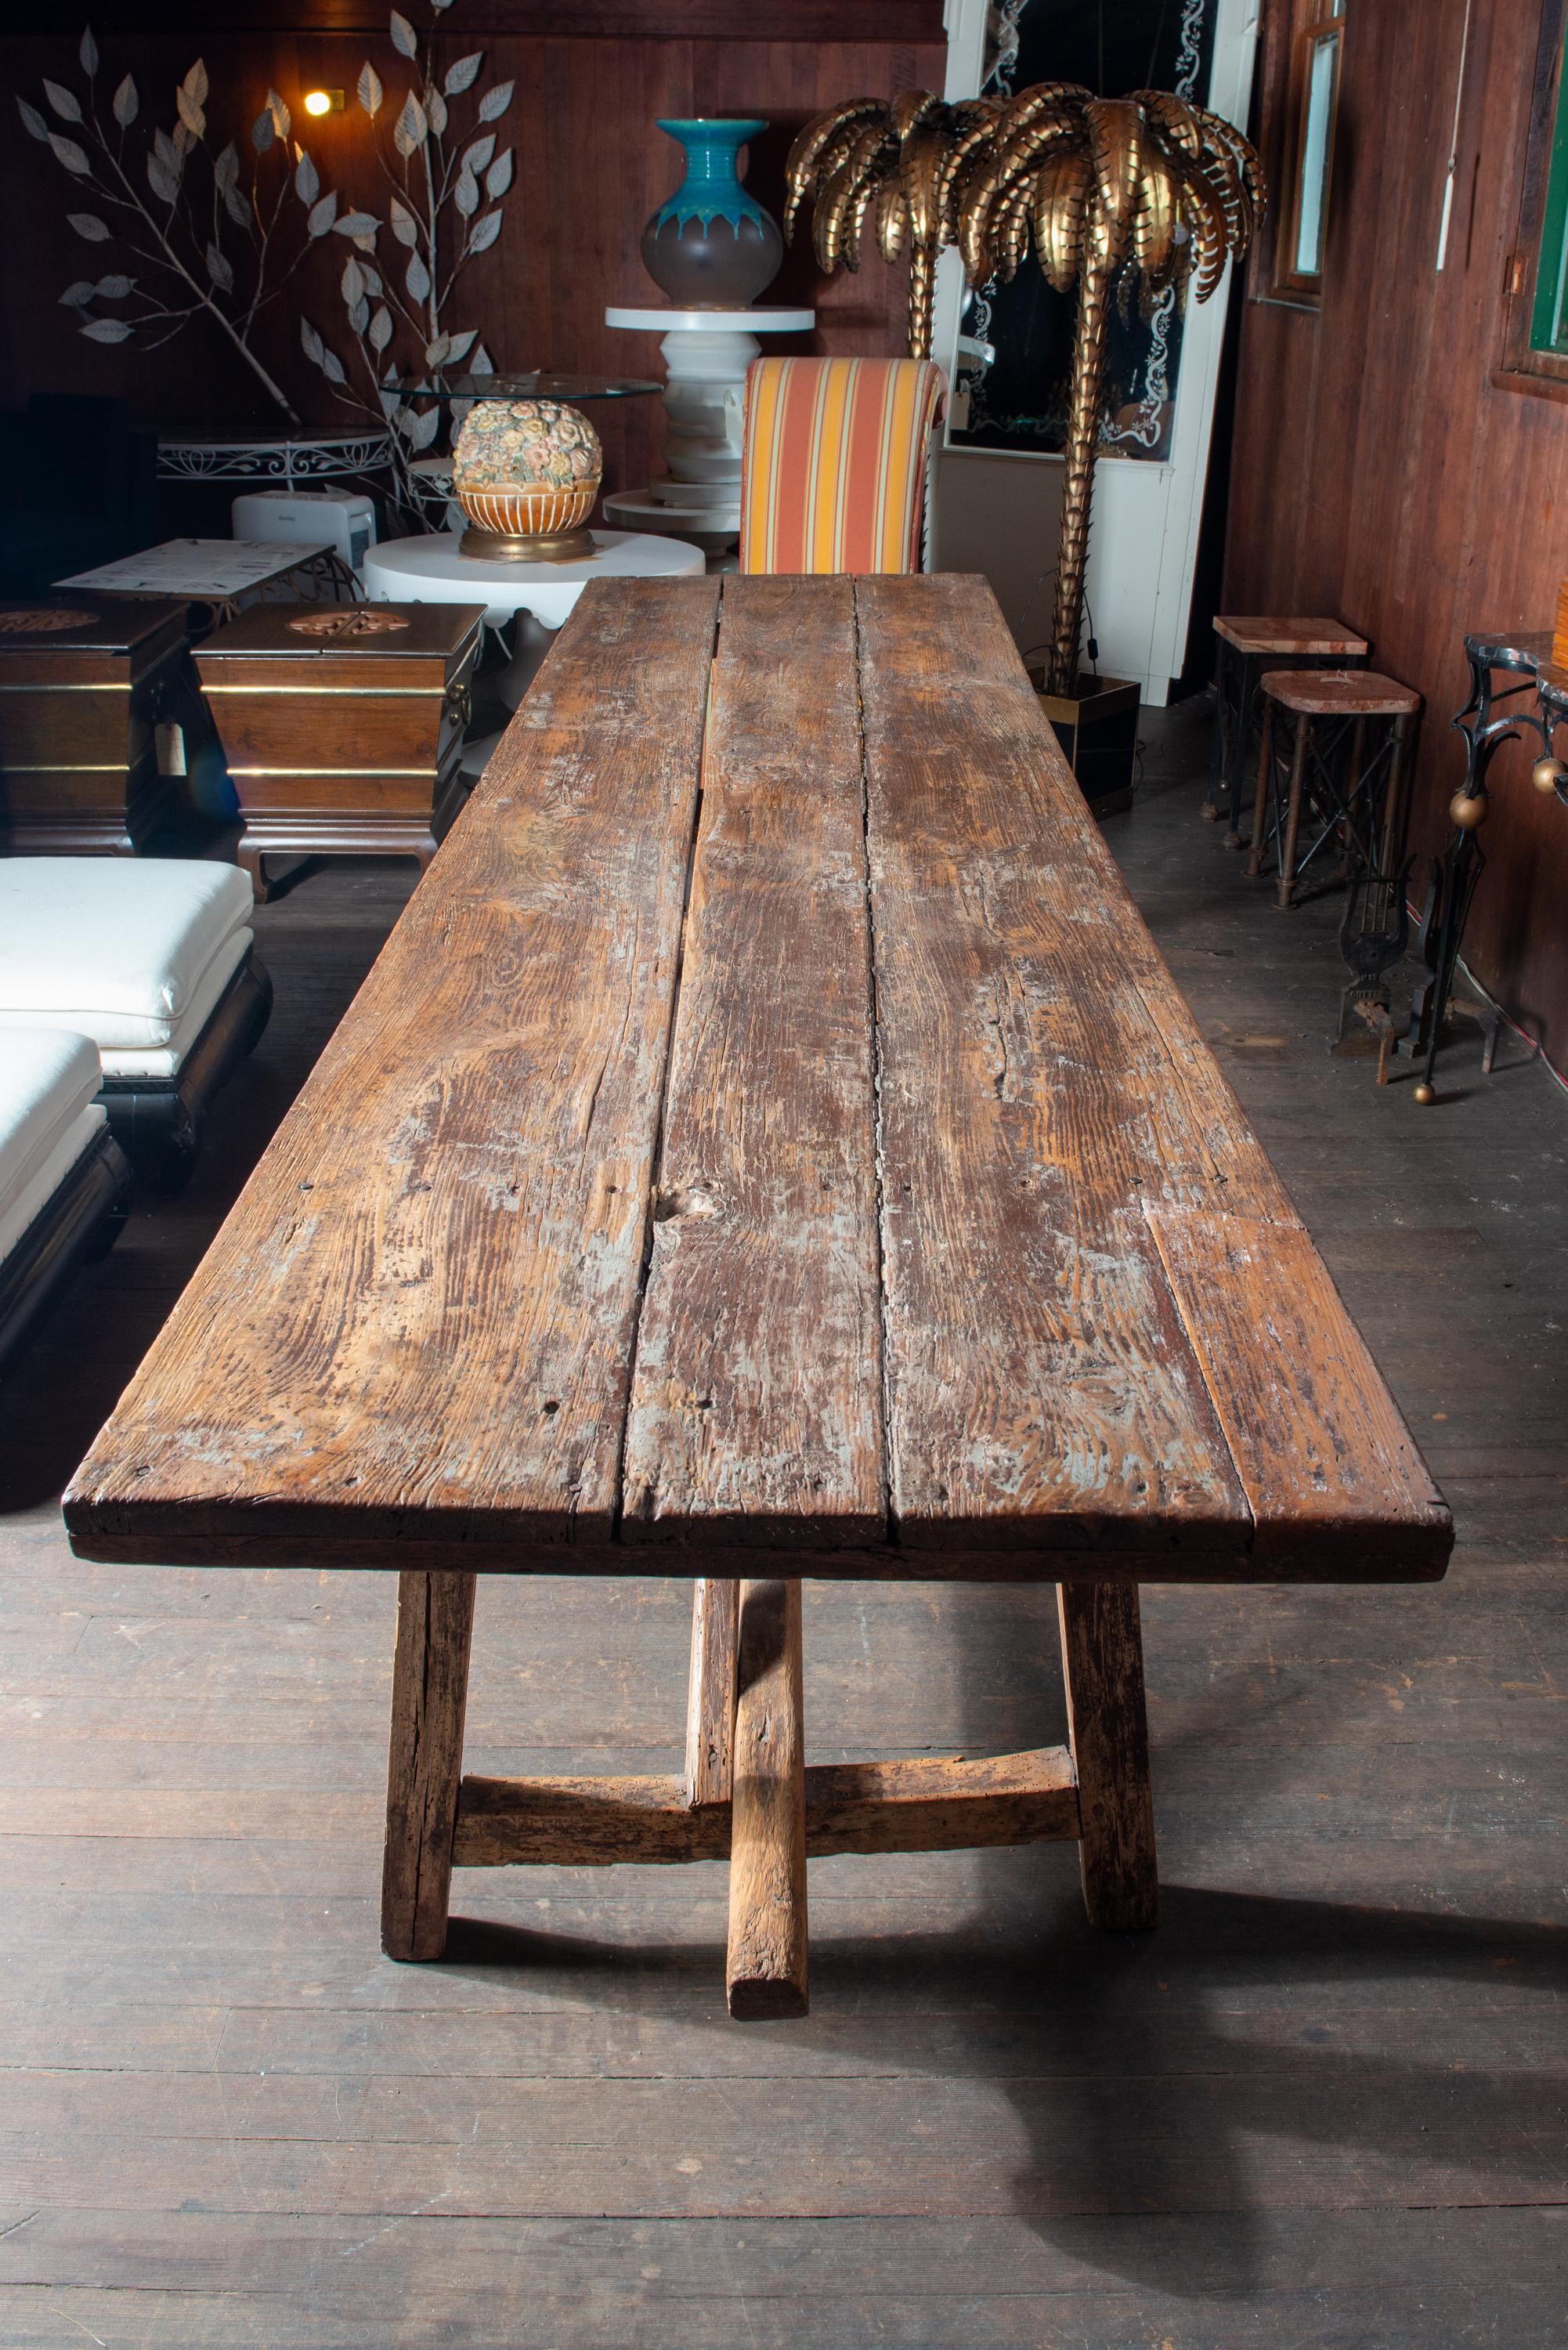 A stunning rustic dining farm table from the Netherlands. It is a Dutch style trestle construction with angled stretchers. The table top is formed by three long thick hardwood planks. The table depth of 31